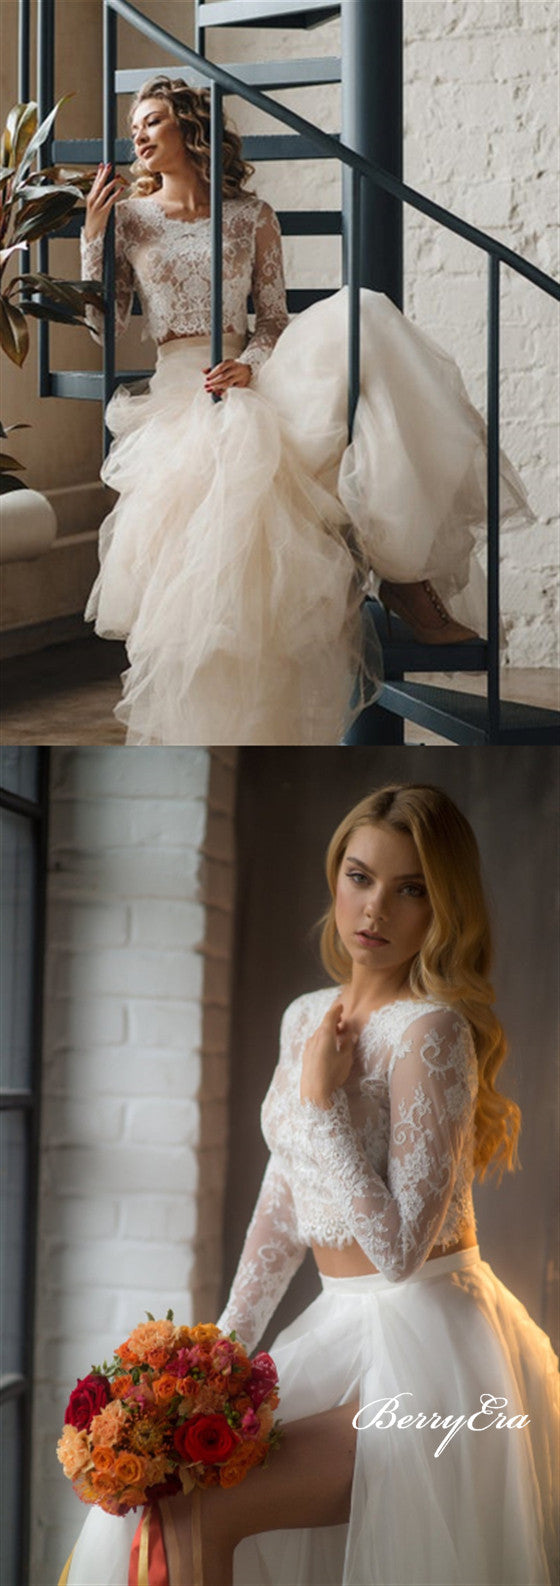 2 Pieces Lace Top A-line Tulle Skirt Long Wedding Dresses, Bridal Gown